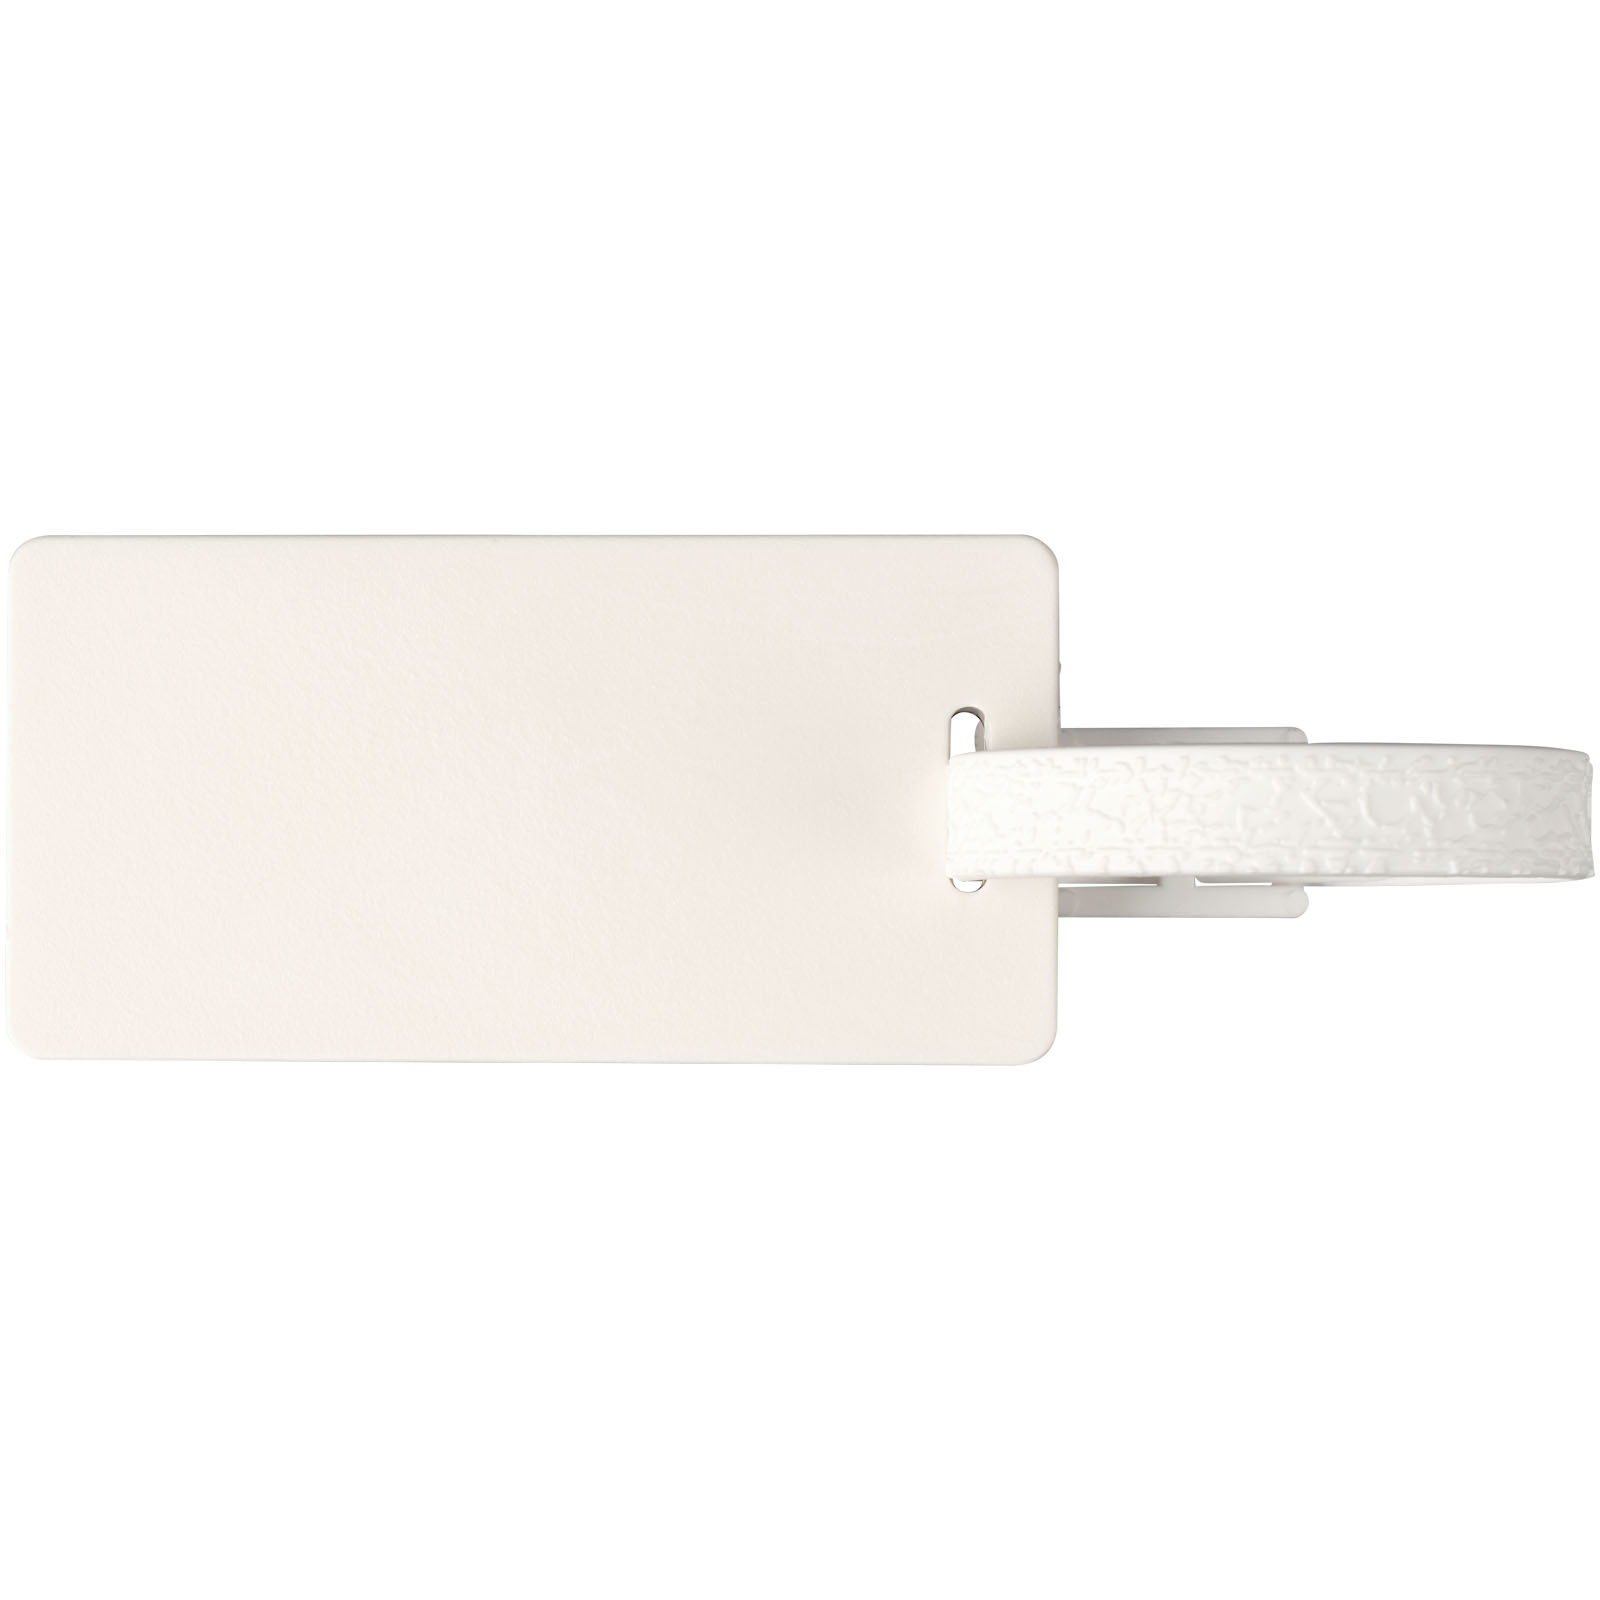 Advertising Travel Accessories - River recycled window luggage tag - 2